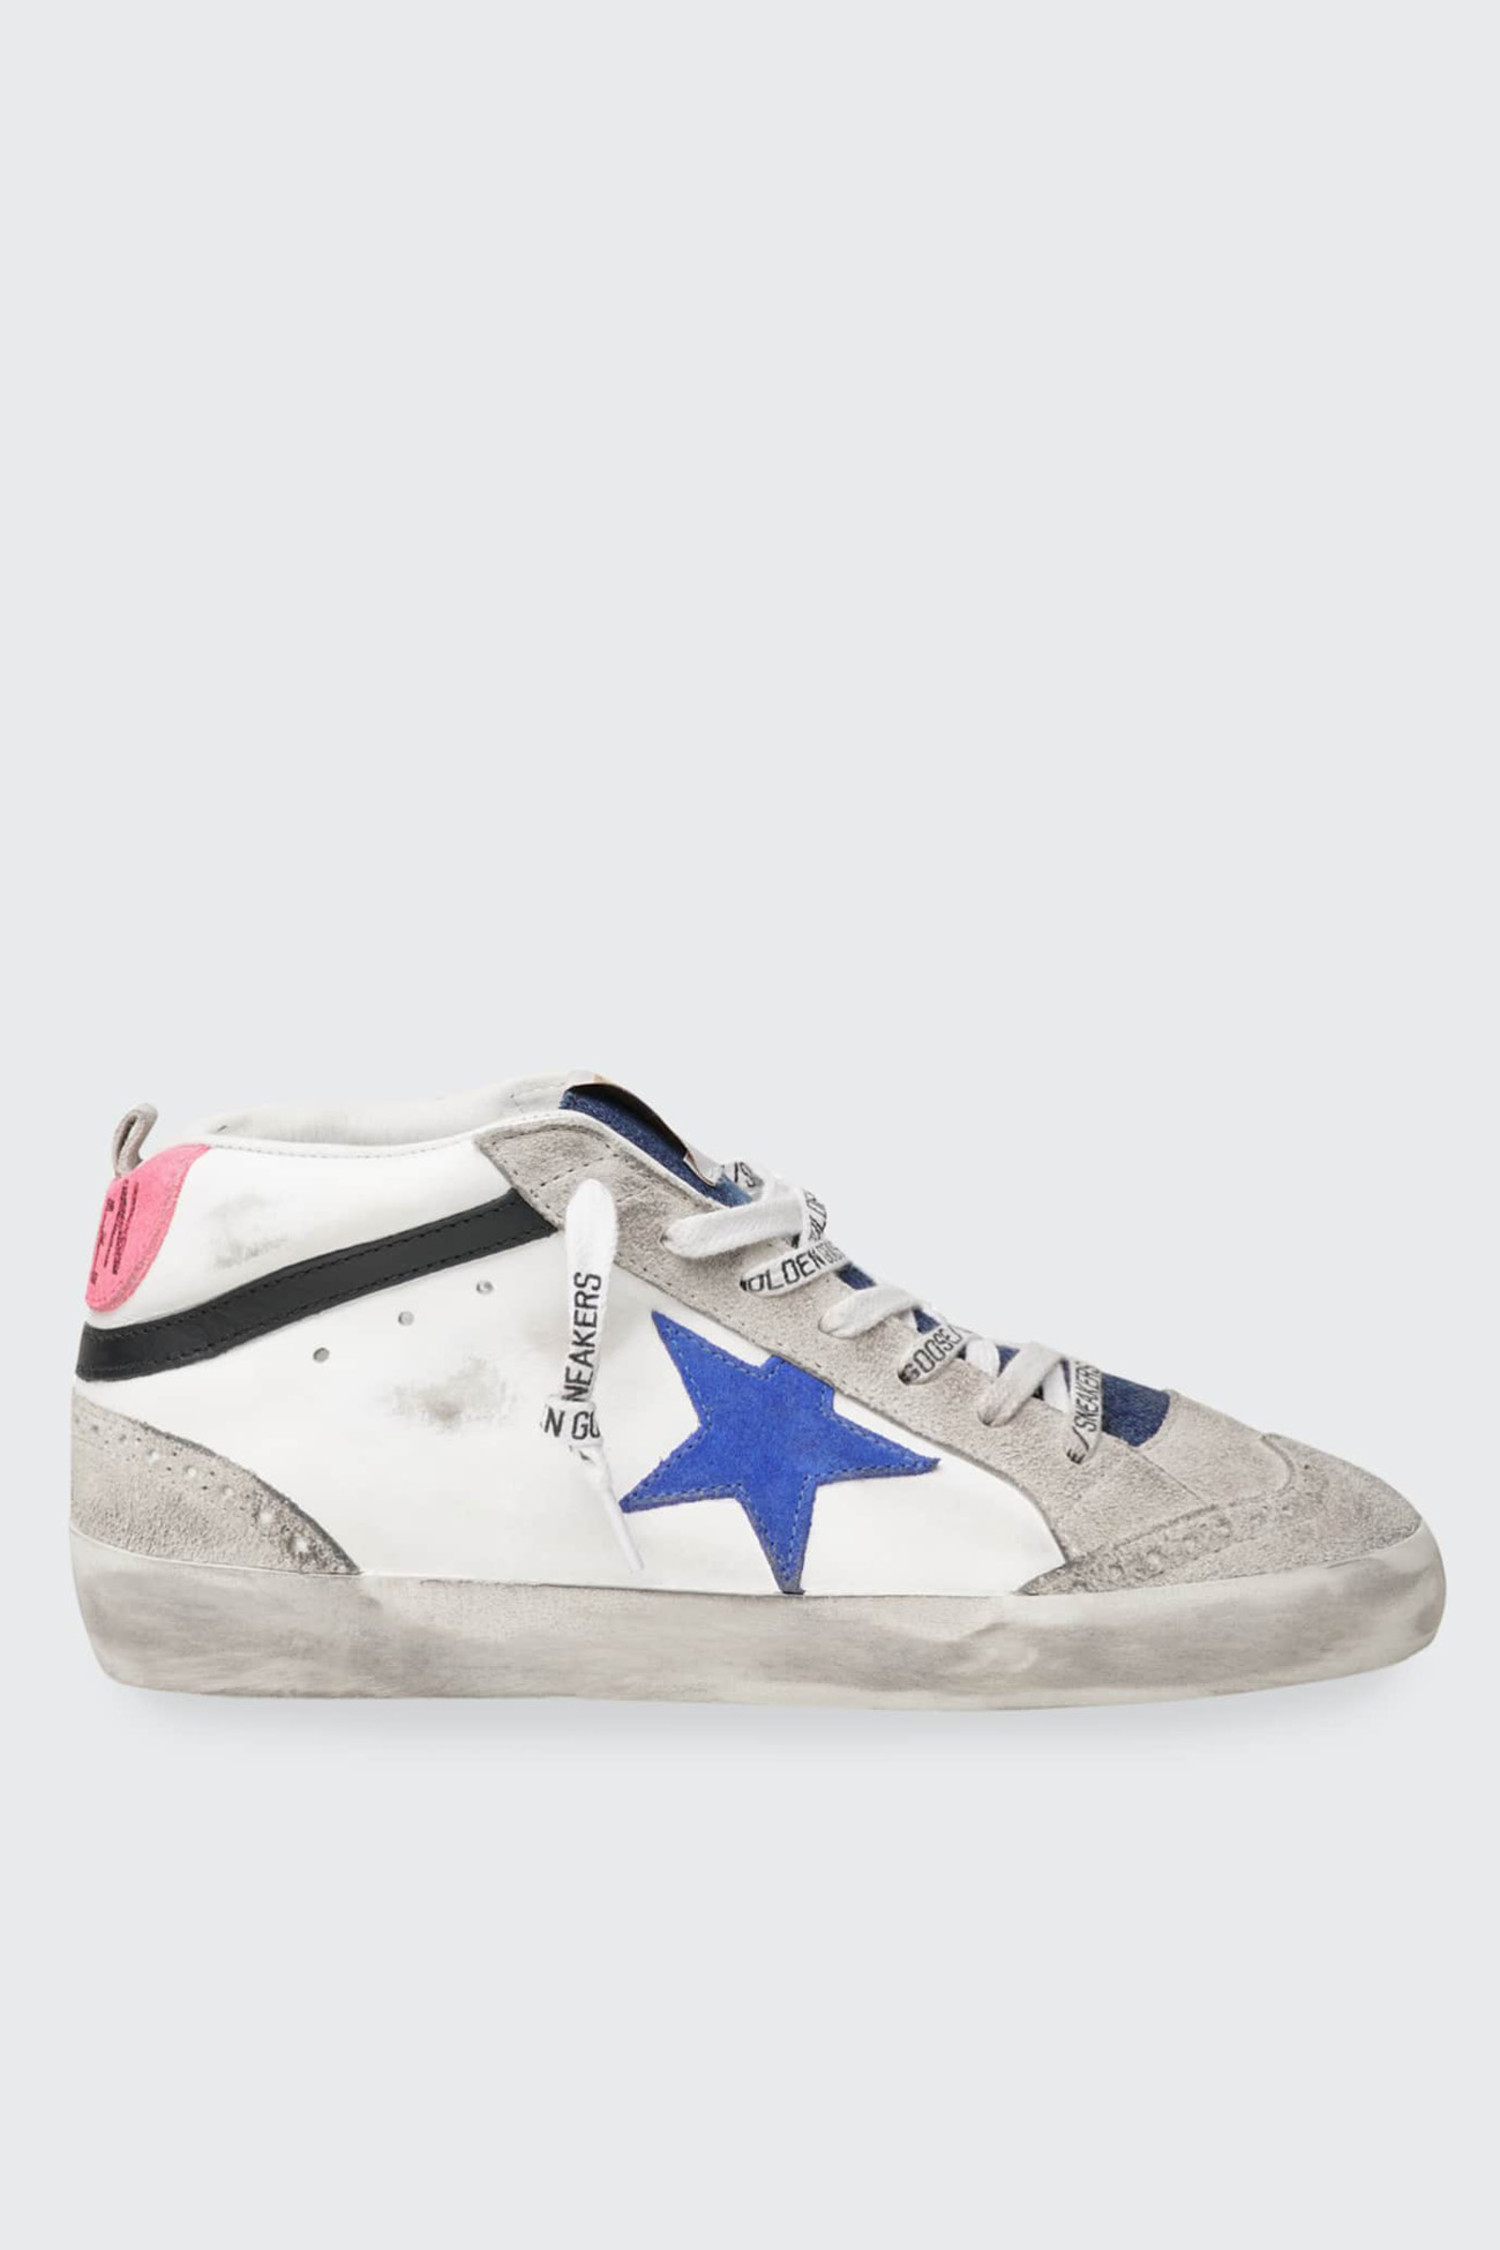 golden goose white leather blue suede